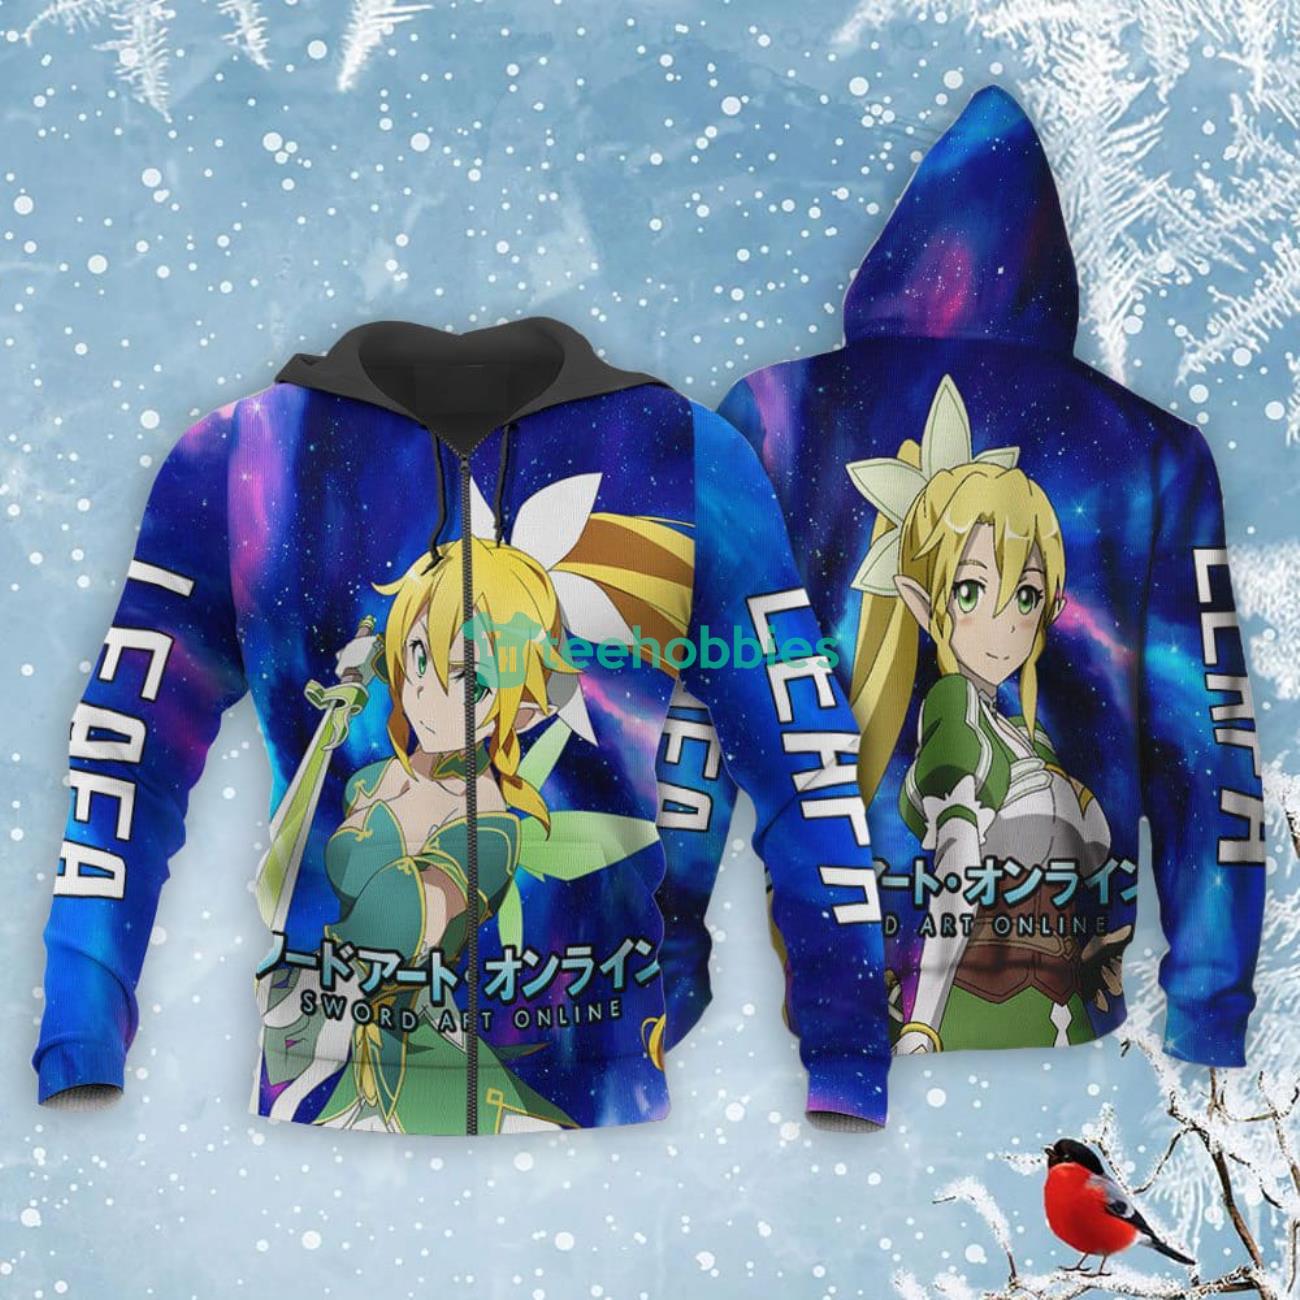 Leafa All Over Printed 3D Shirt Sword Art Online Custom Anime Fans Product Photo 1 Product photo 1